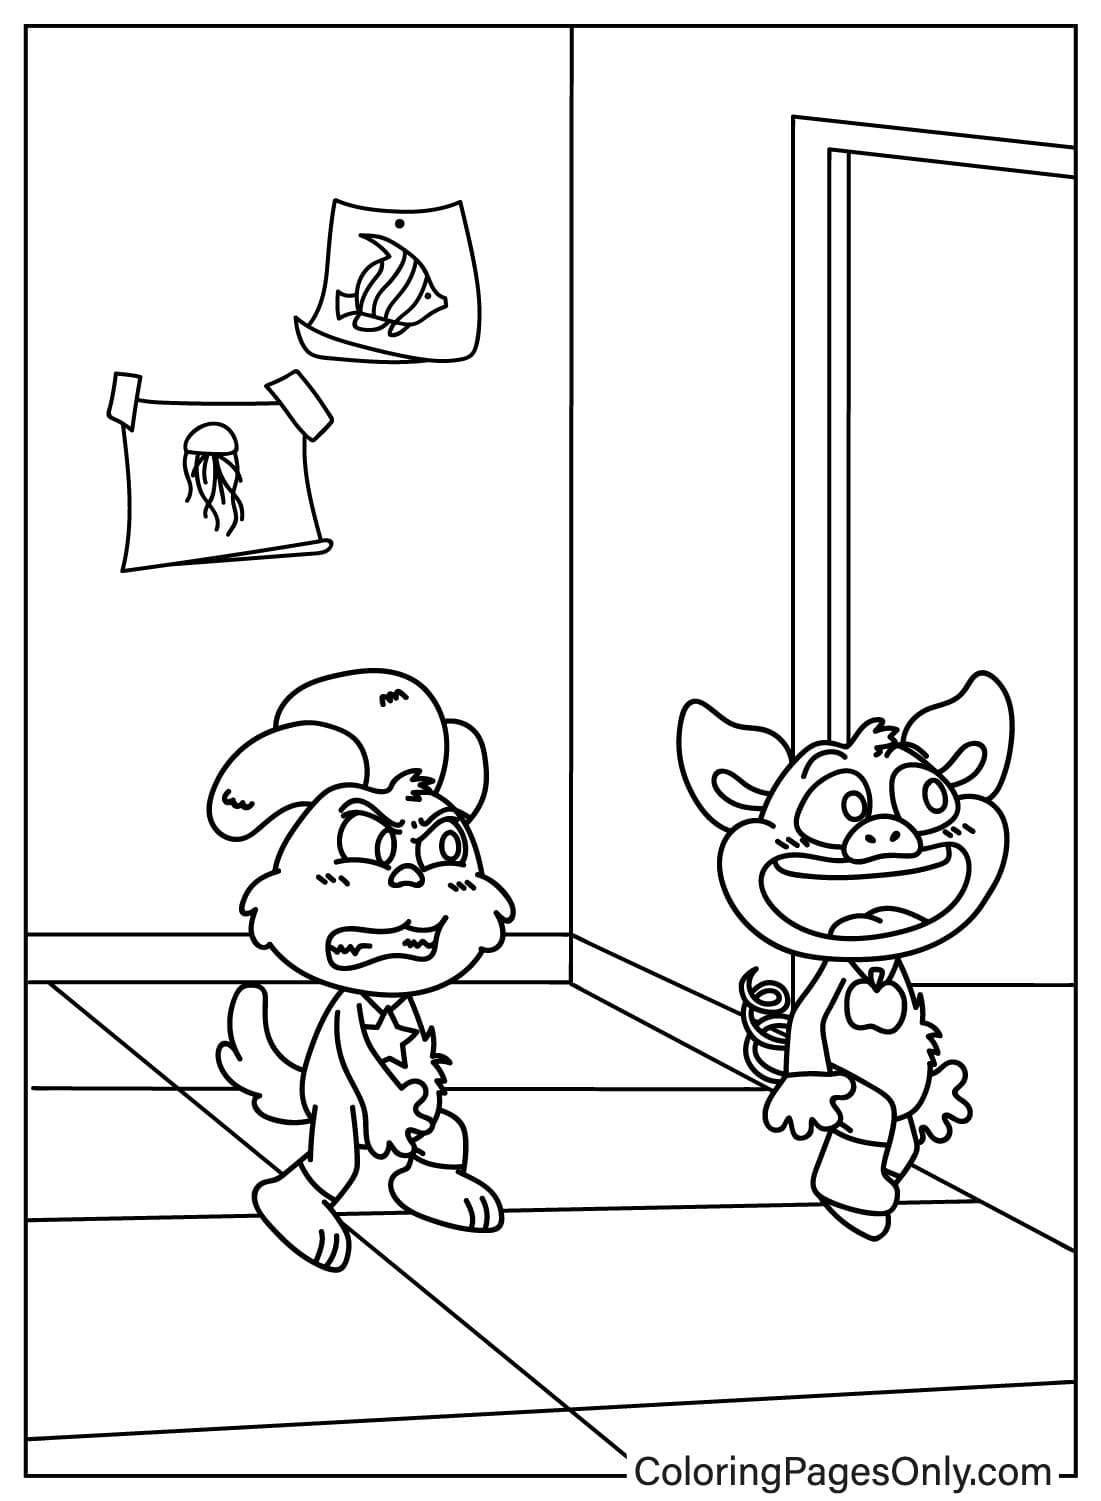 KickinChicken and PickyPiggy Coloring Page from KickinChicken